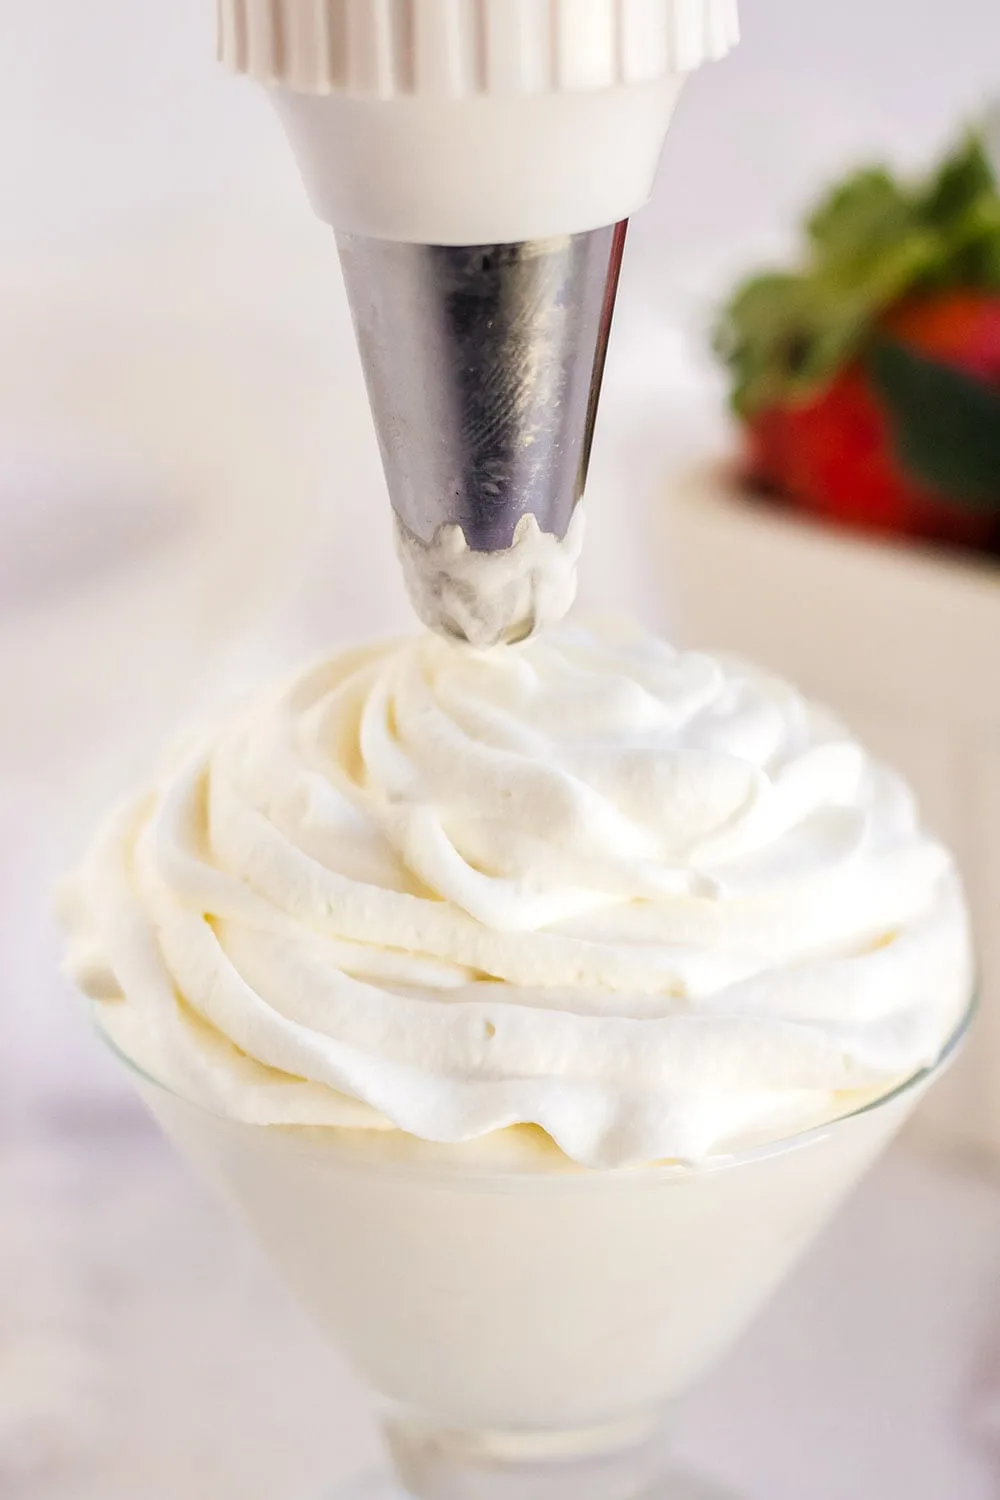 Piping whipped topping into a glass.